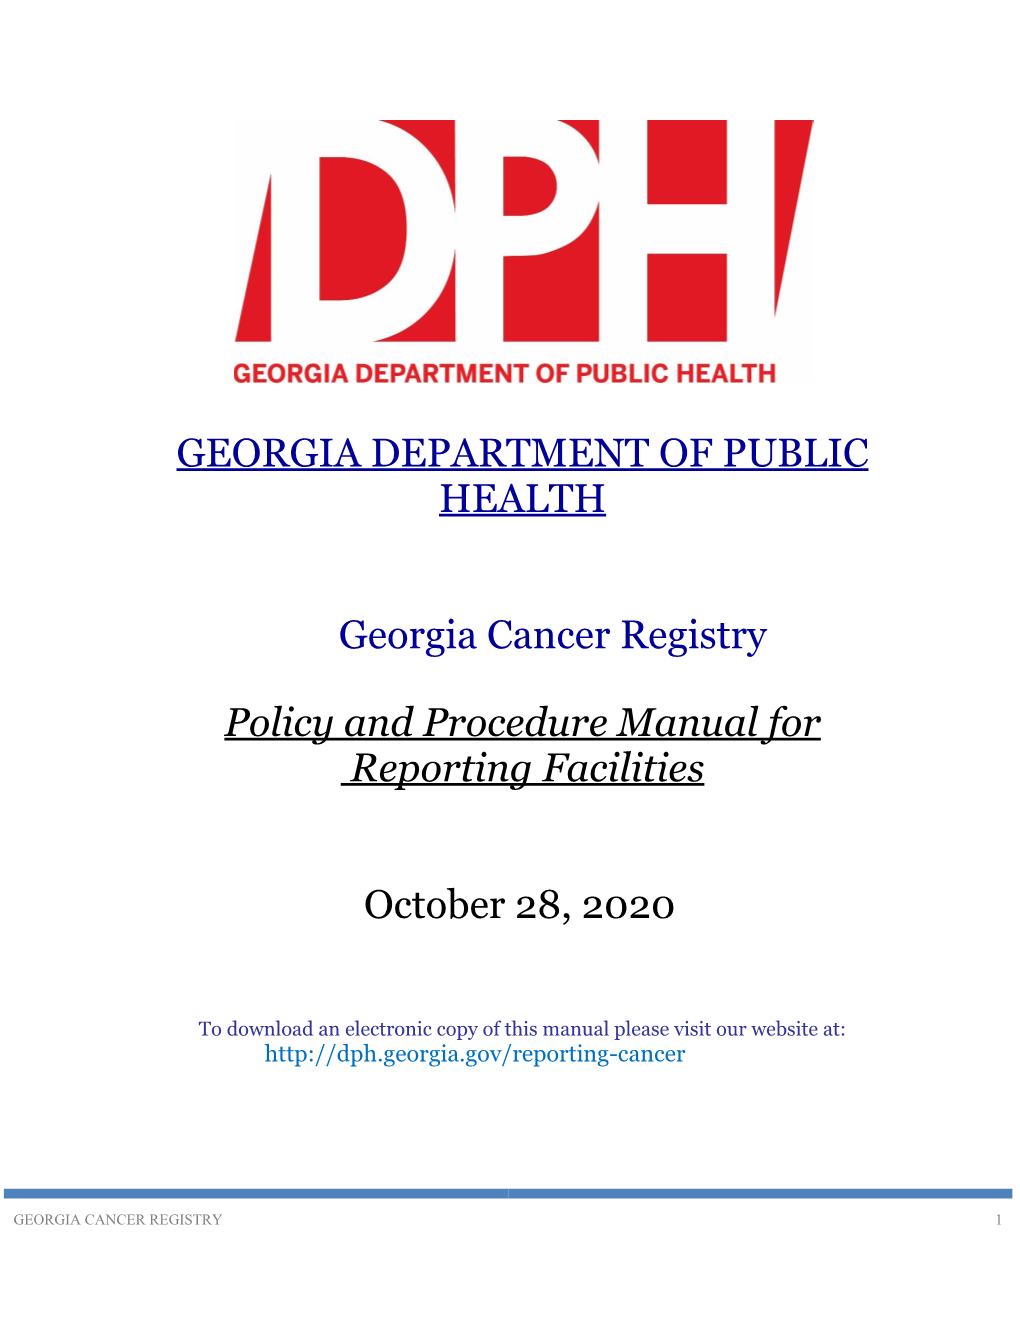 Policy and Procedure Manual for Reporting Facilities October 28, 2020